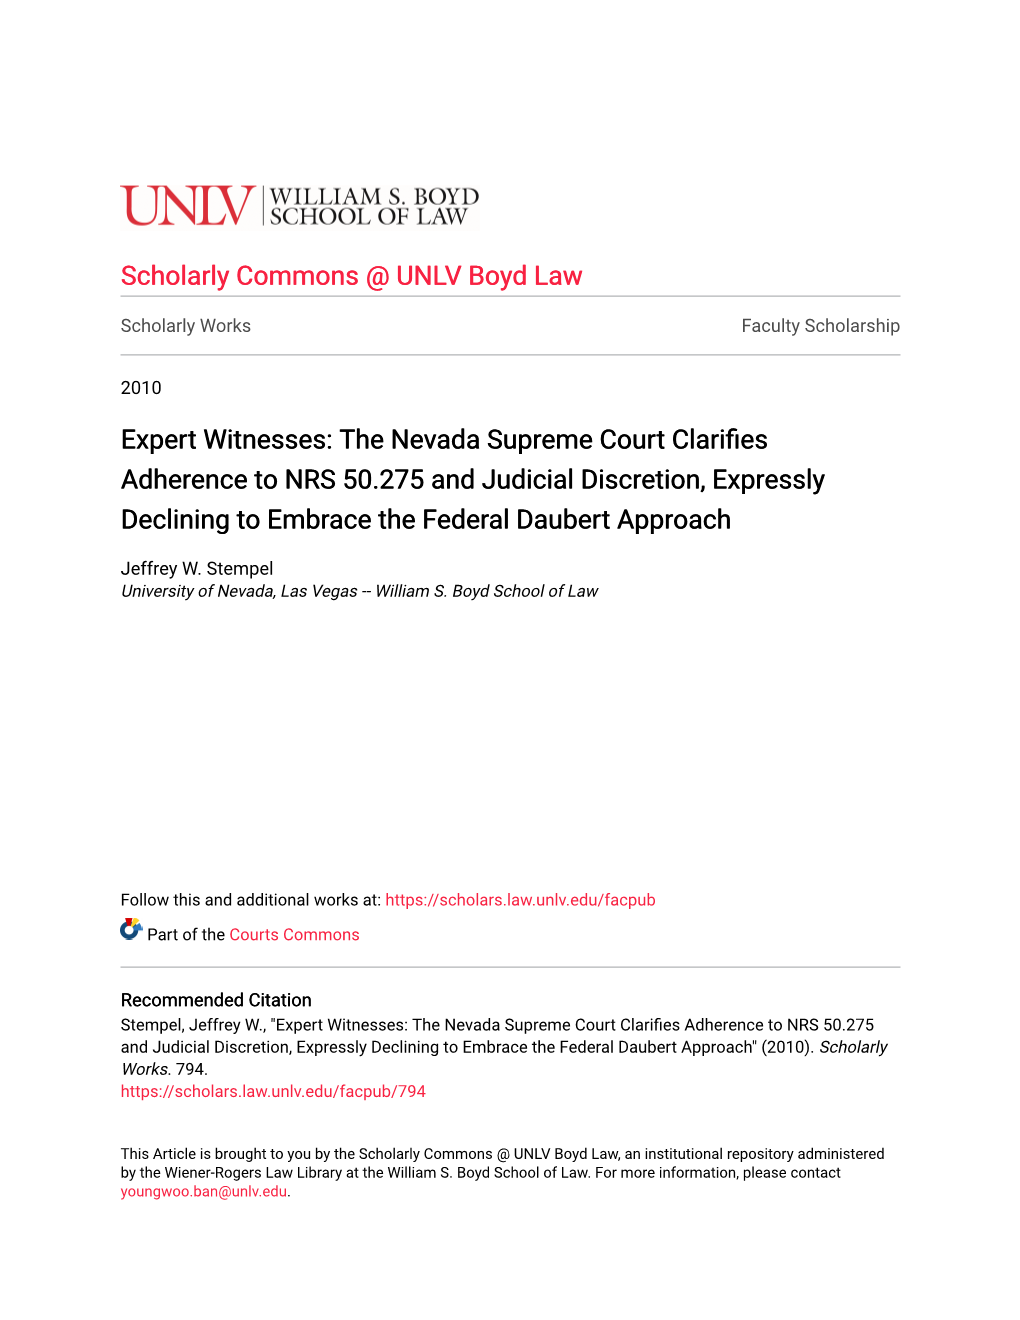 Expert Witnesses: the Nevada Supreme Court Clarifies Adherence to NRS 50.275 and Judicial Discretion, Expressly Declining to Embrace the Federal Daubert Approach